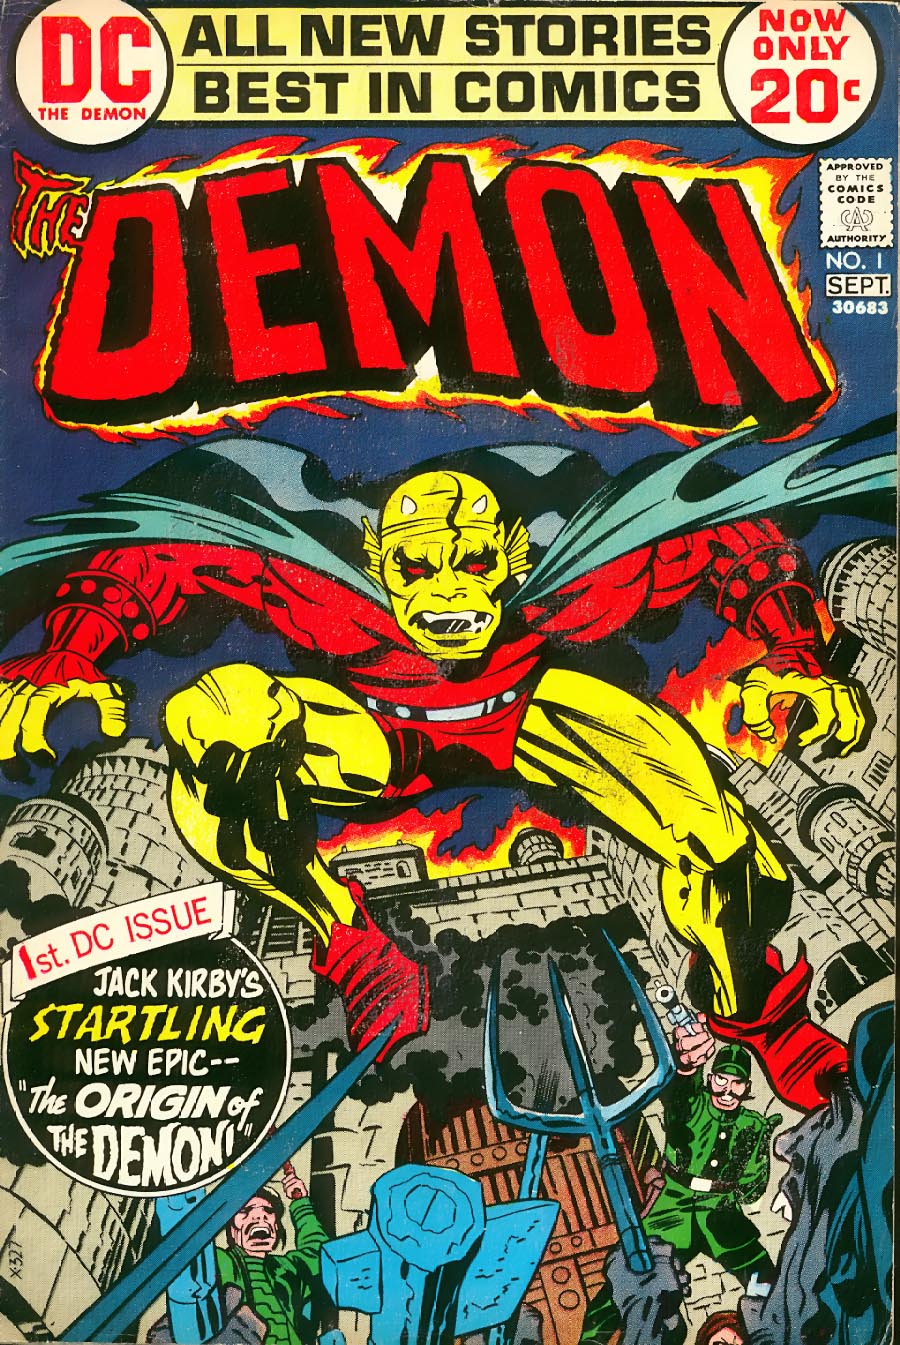 Top 5 Comic Book Monsters - The Demon